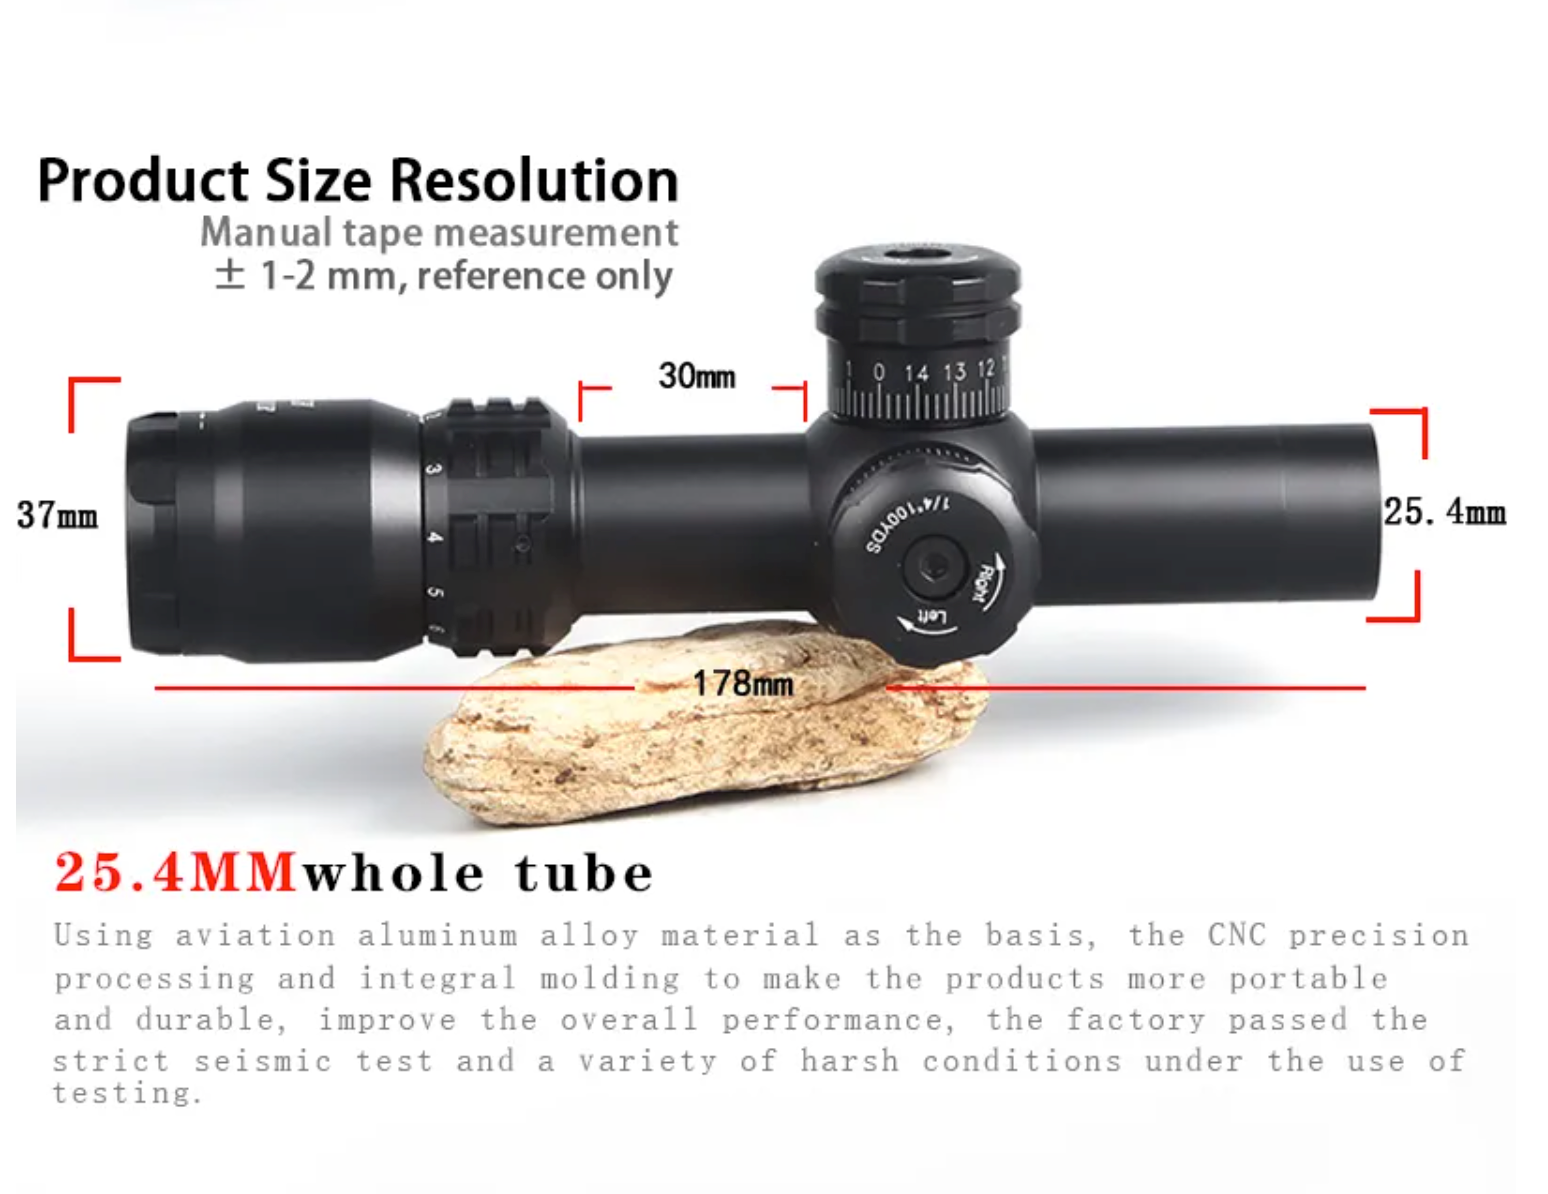 T-EAGLE  March AMG HD 2-8X20 IR Compact Scope